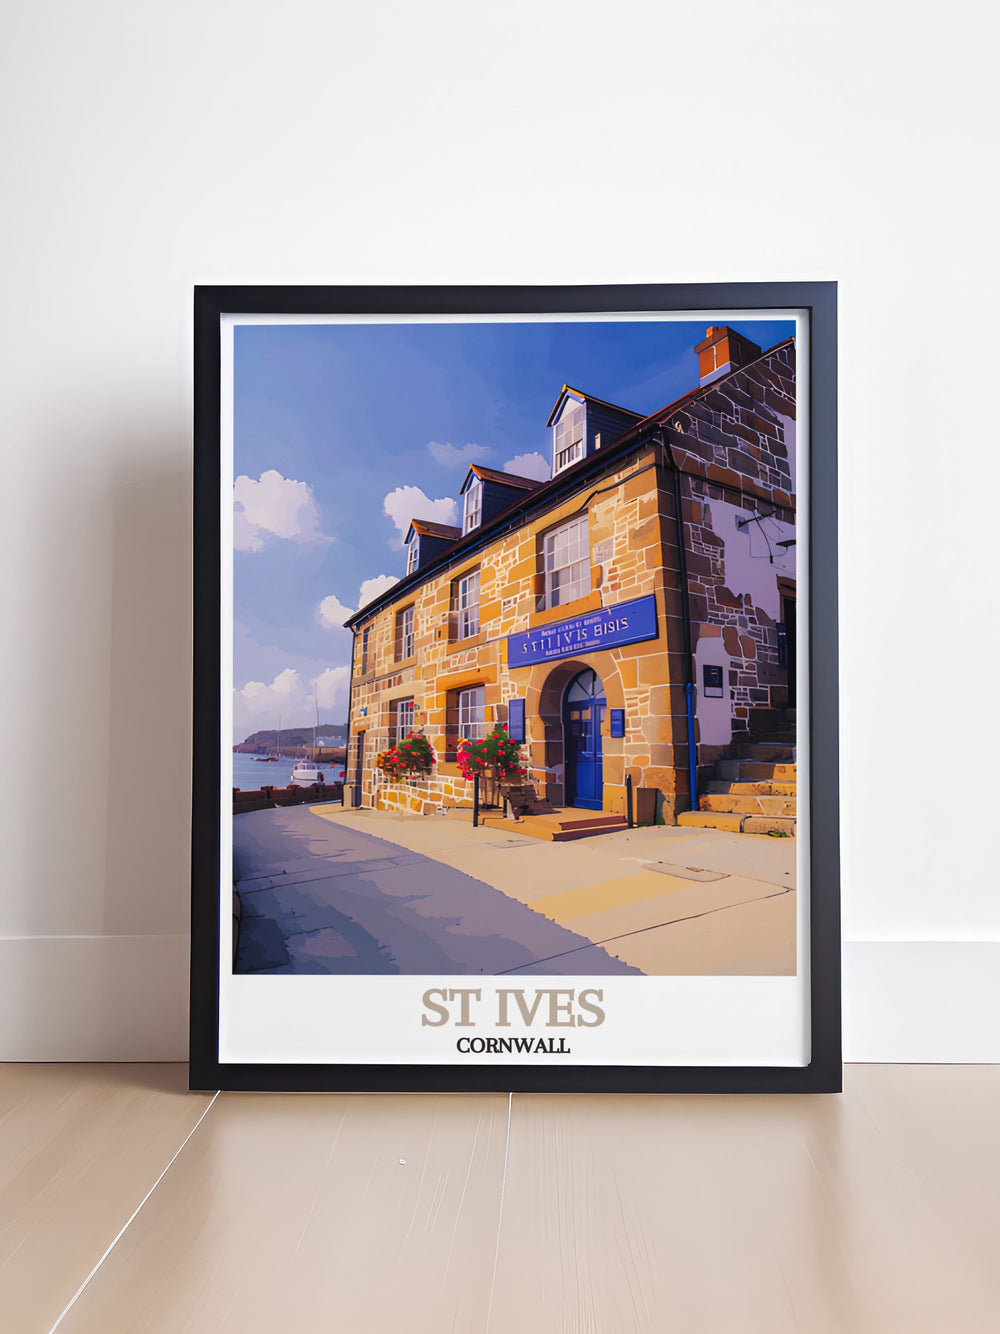 This travel poster beautifully captures St Ives Museum, showcasing its historical significance and inviting viewers to explore the rich heritage of this Cornish town.